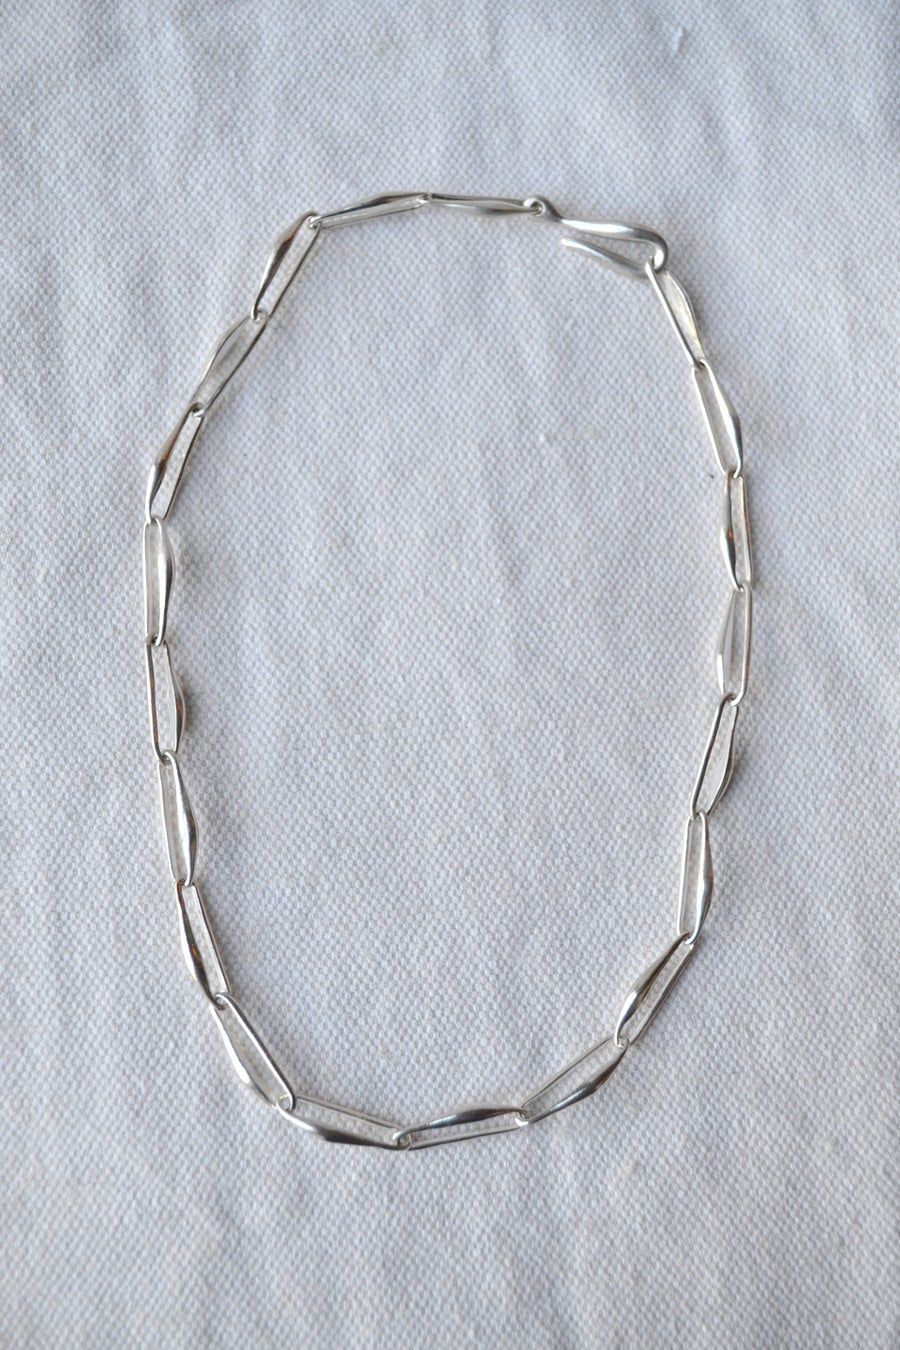 Timeless Silver Chains for Elegant Accessories